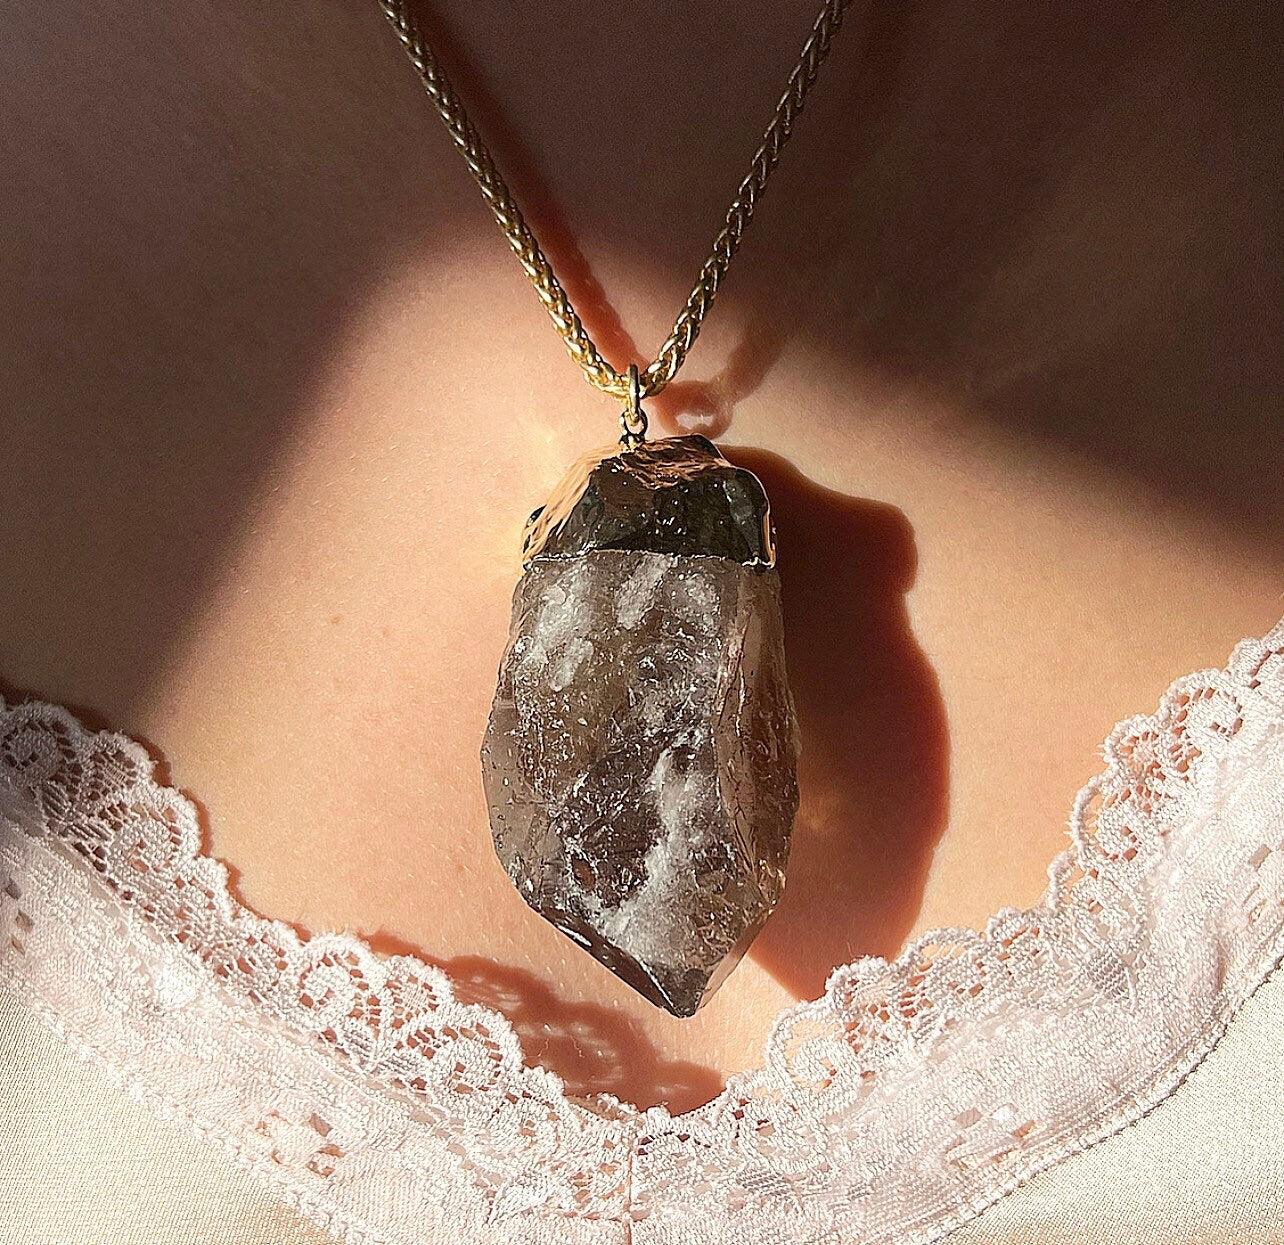 Crystal Necklace Clear Quartz with Inclusions and Rainbows Big Crystal  Statement Jewelry / Healing Crystal Gothic Edgy Jewelry